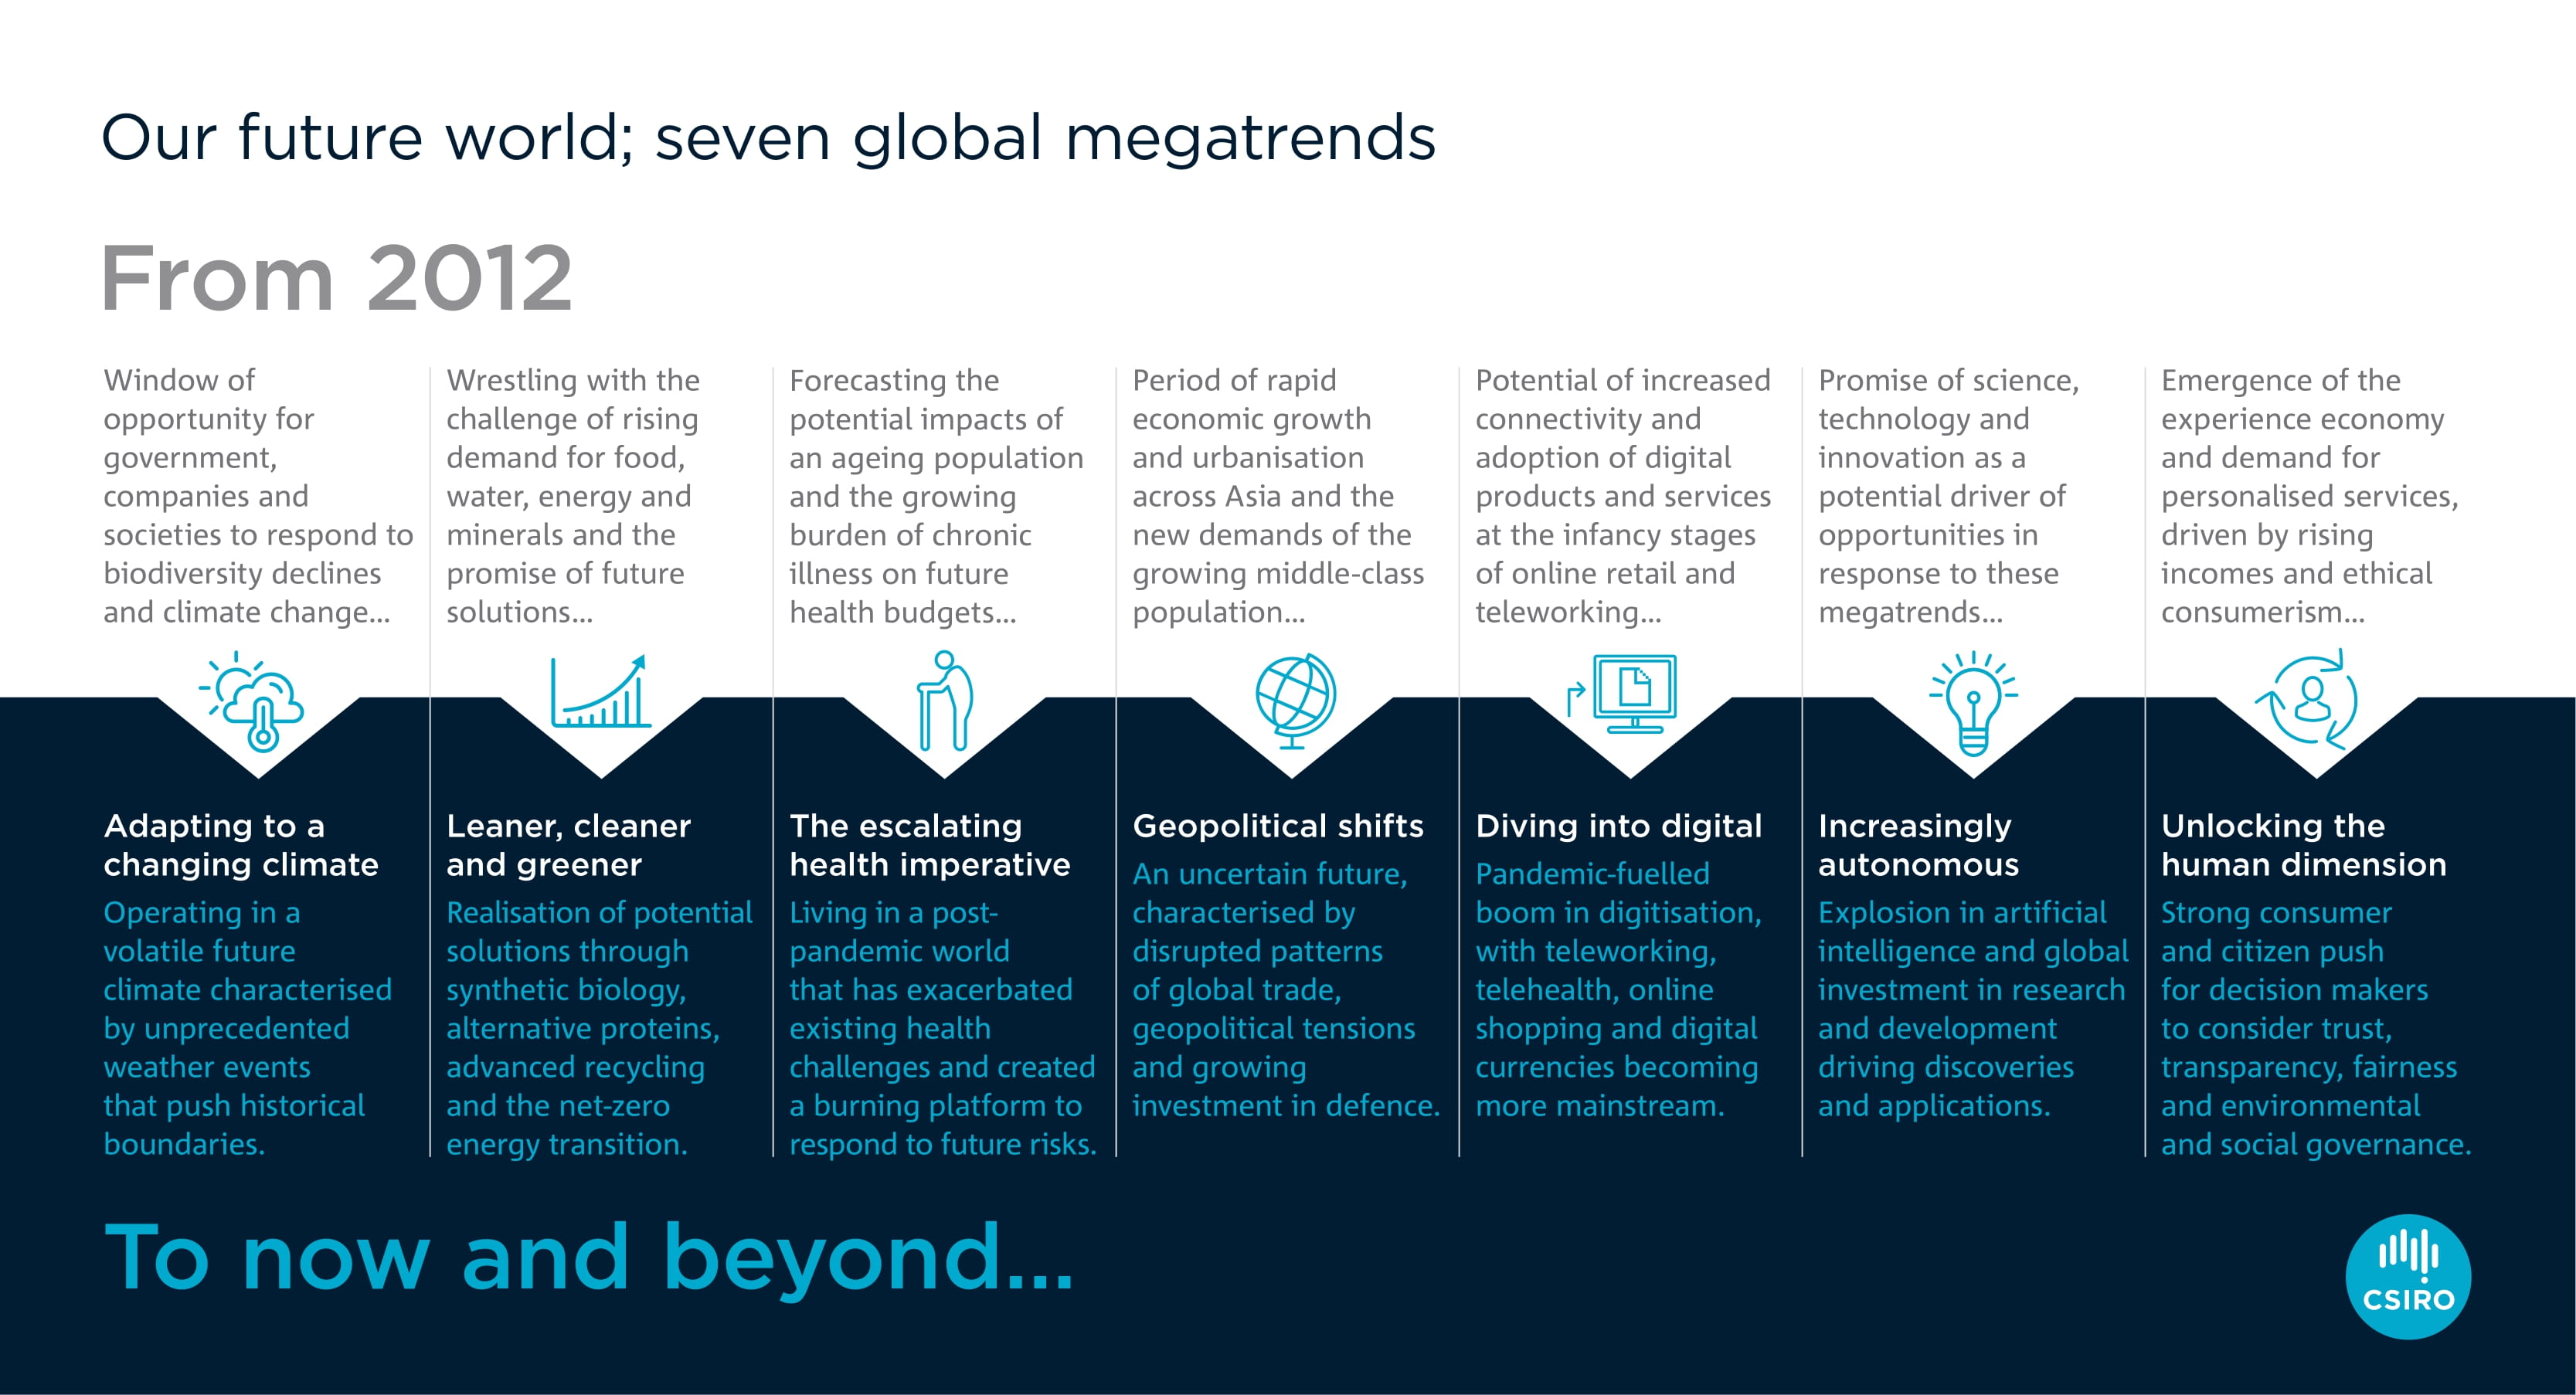 A graphic comparing megatrends from 2012 to 2022.